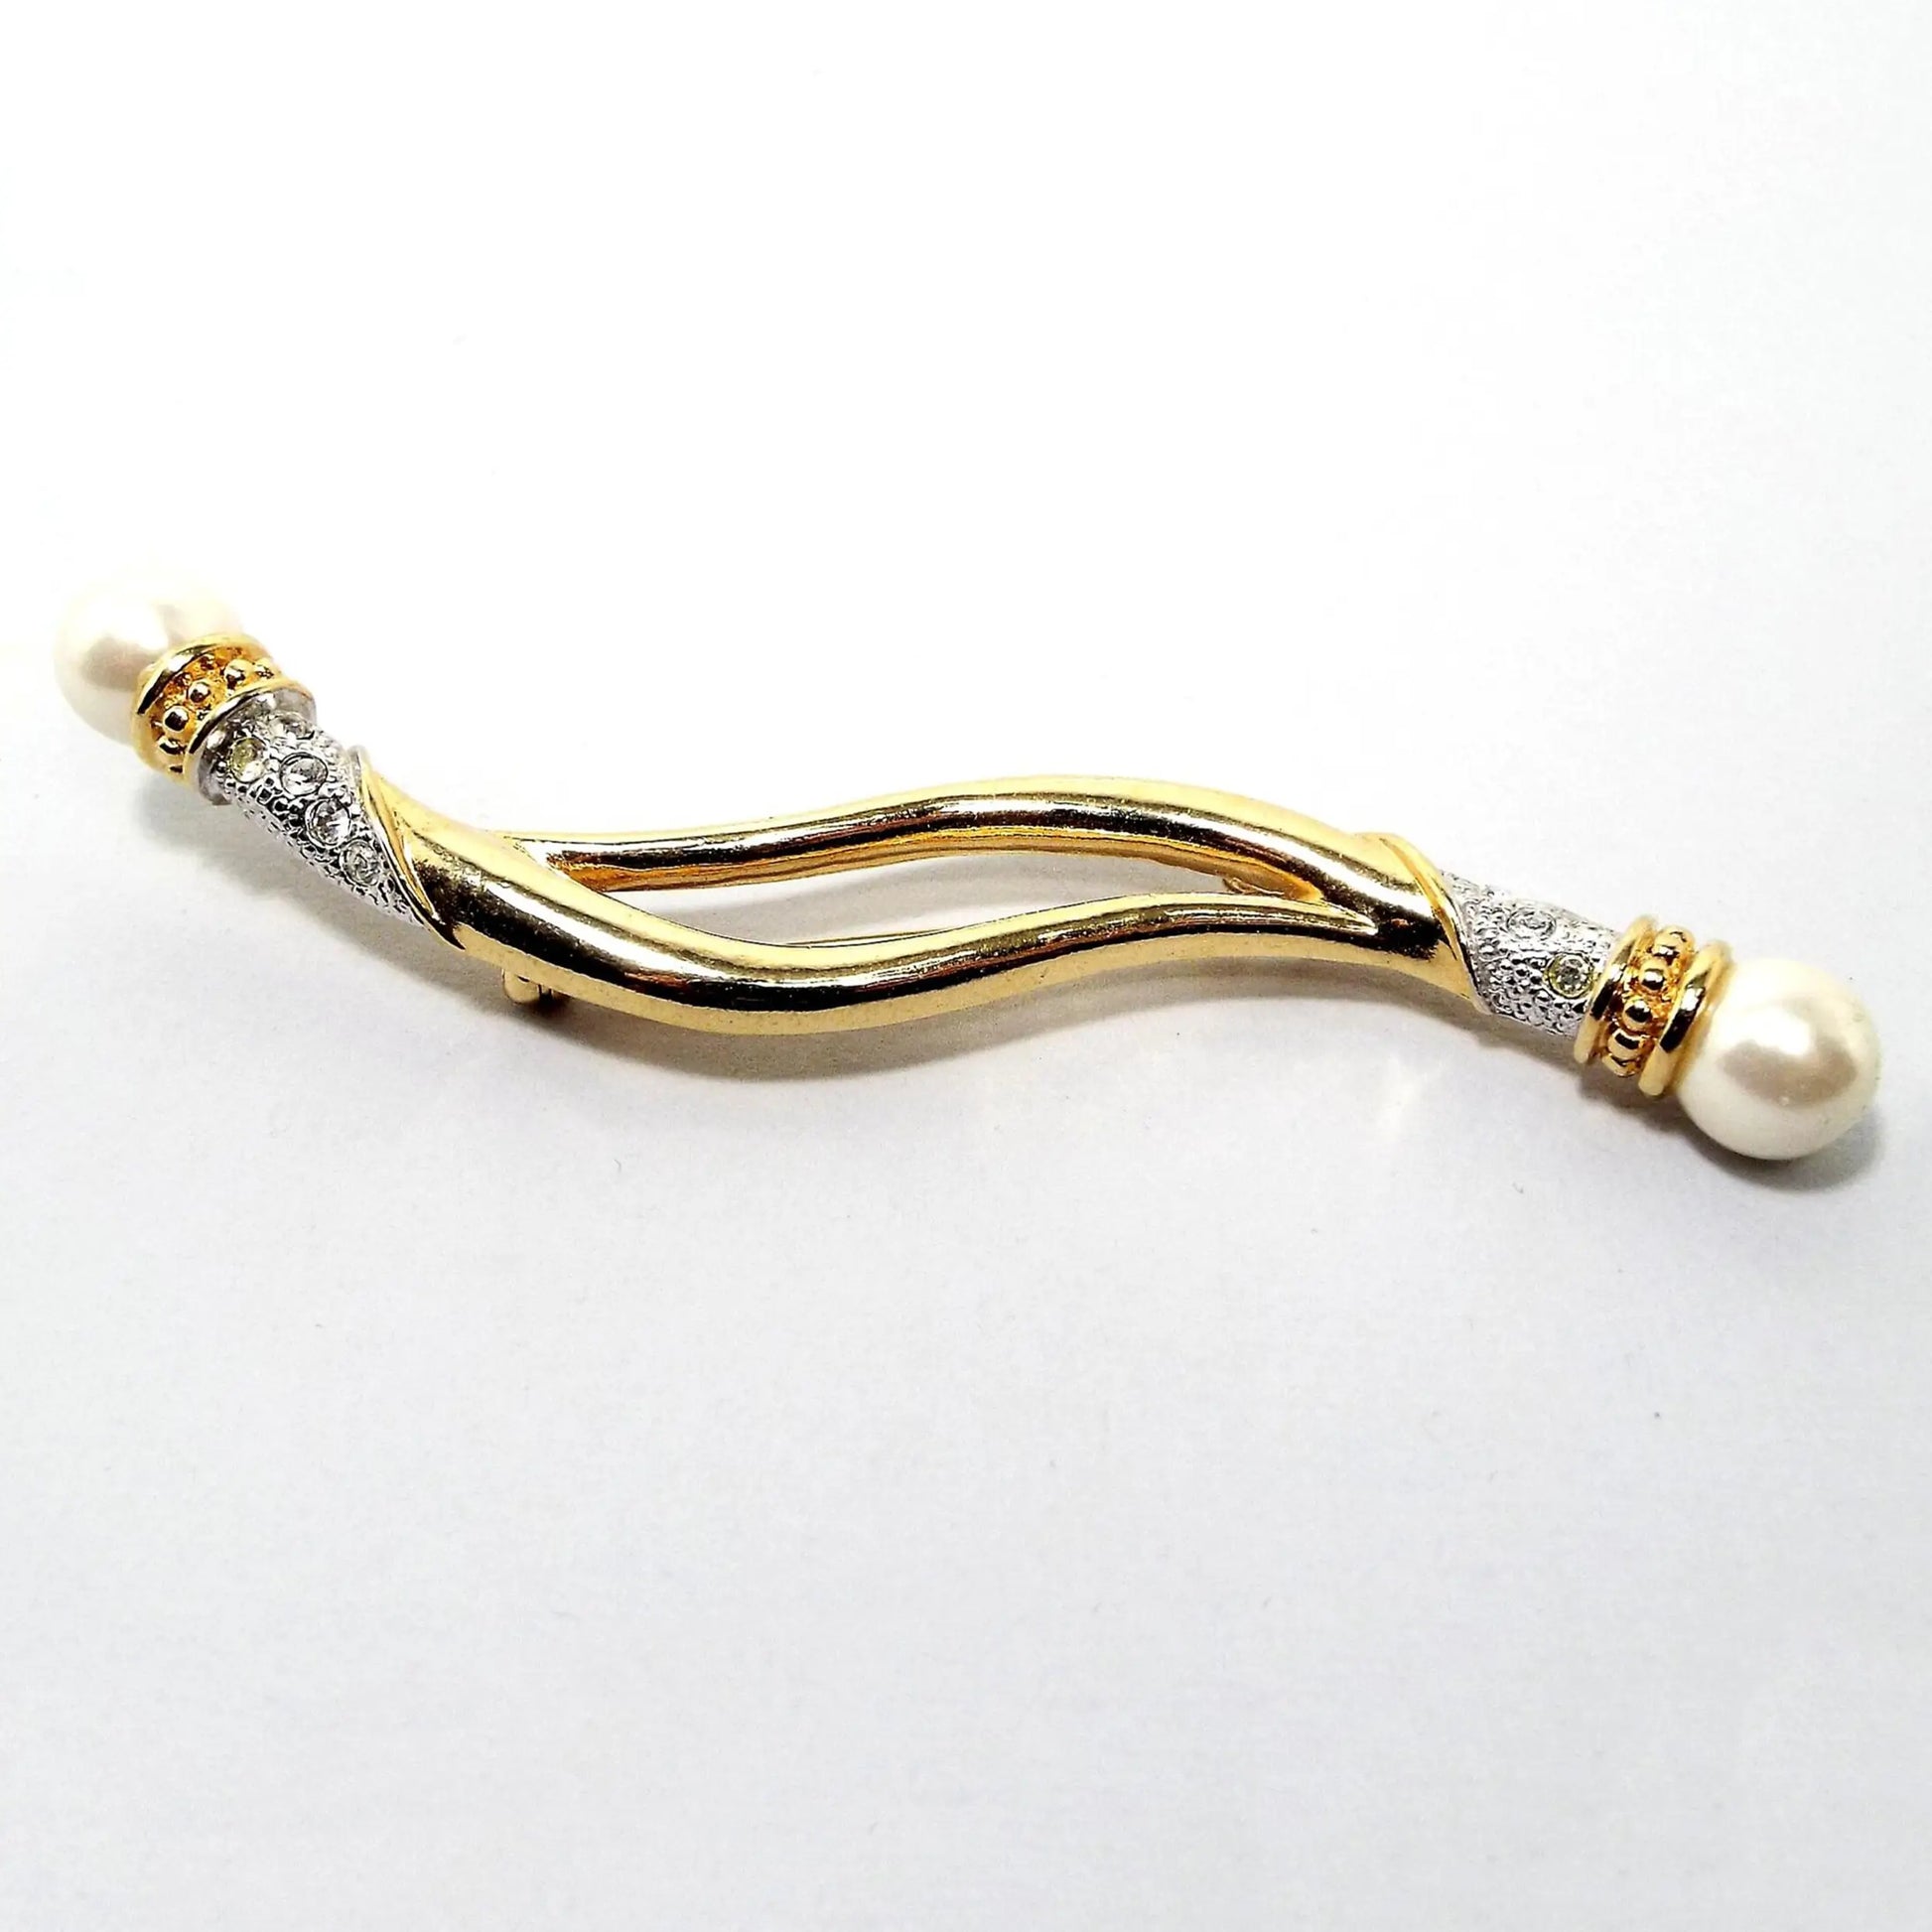 Front view of the retro vintage Avon brooch pin. It is long and curvy with an open split area in the middle. The metal is gold tone in color except for at the ends where it's silver tone in color. In the silver tone area are small round clear rhinestones. There are round faux pearls at the ends.